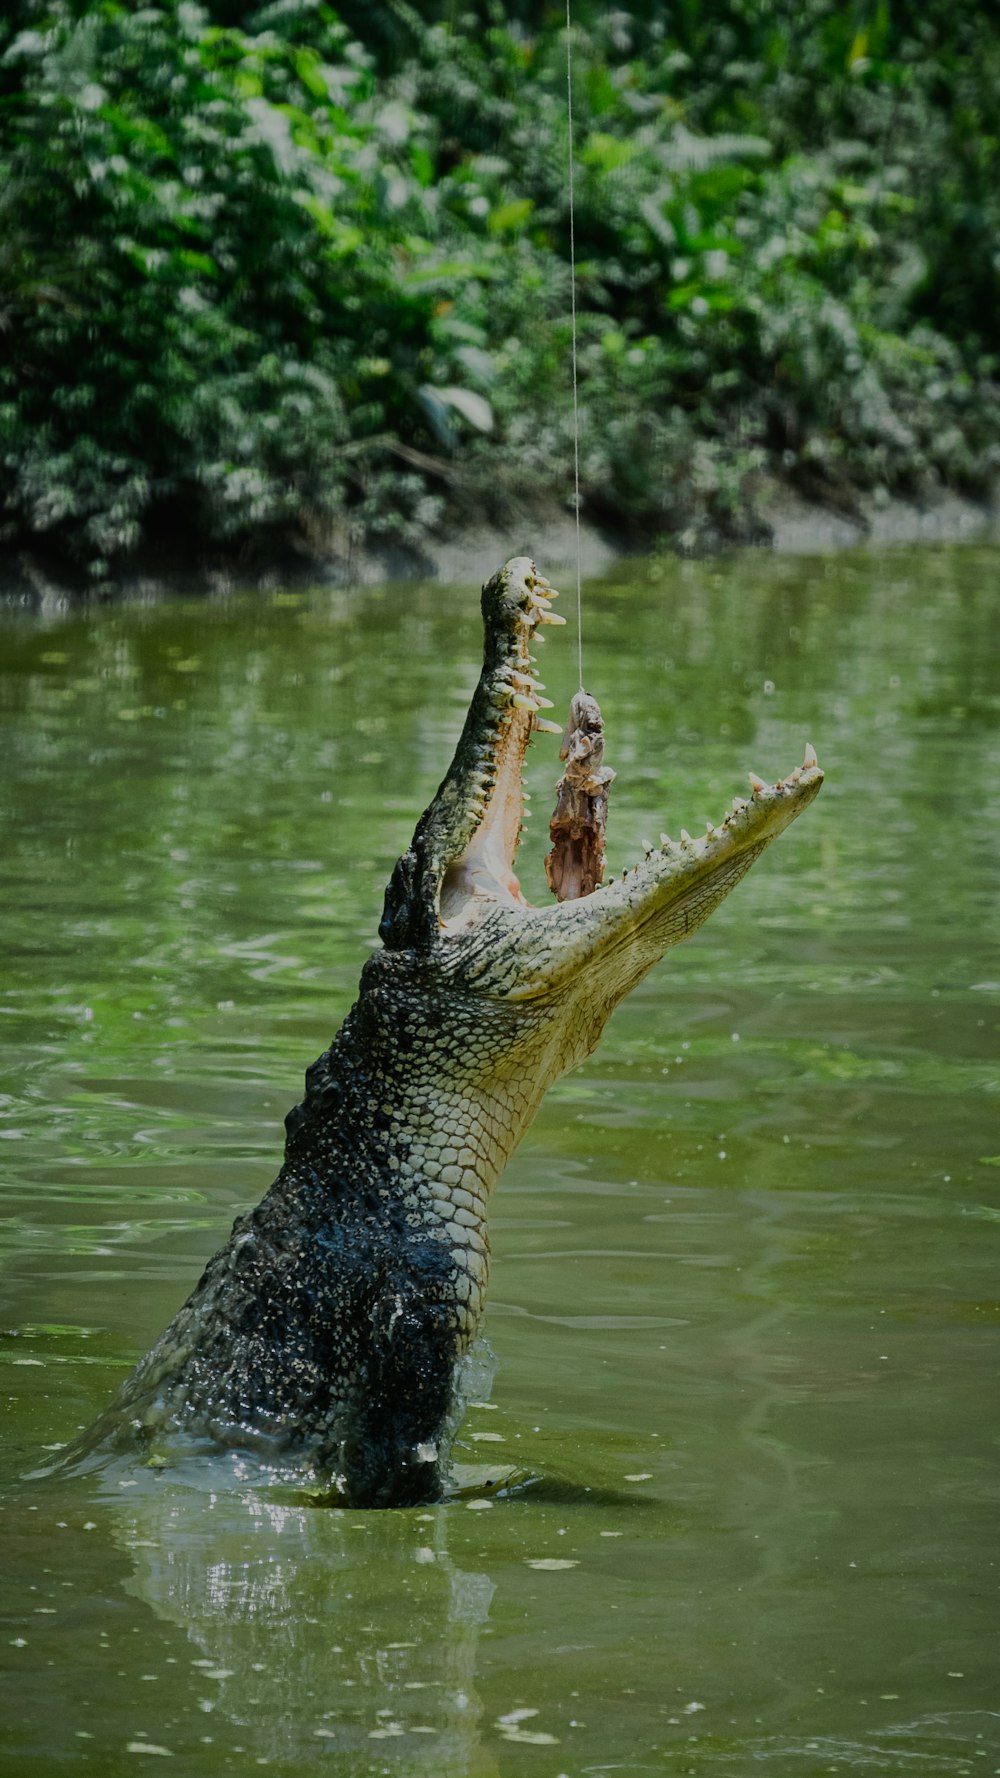 a large alligator is in the water with a toy